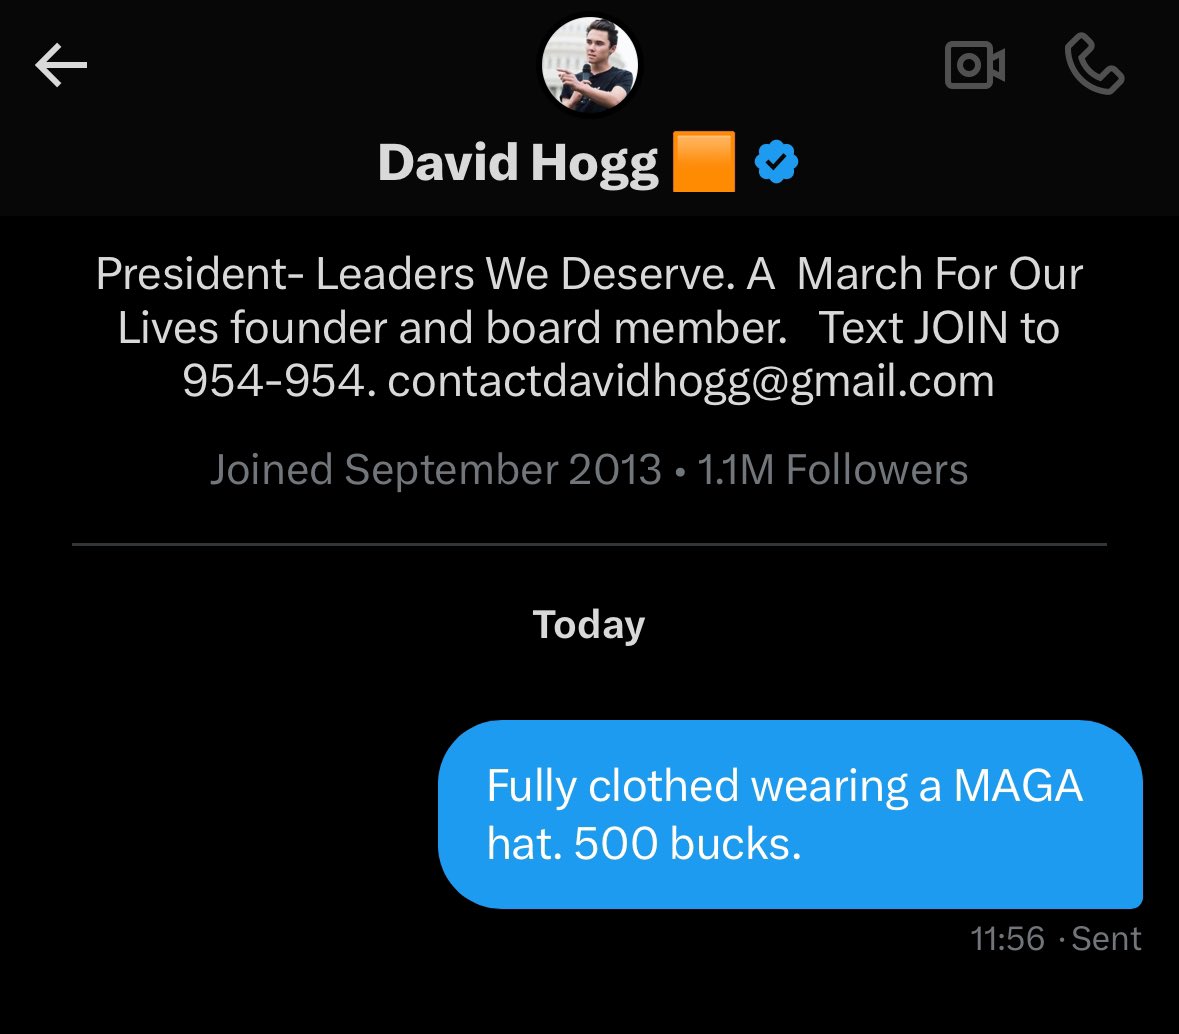 @davidhogg111 Hey bro. 

I’ll help pay your rent in exchange for some photos if you know what I mean 😉.

Offer is in the DM.